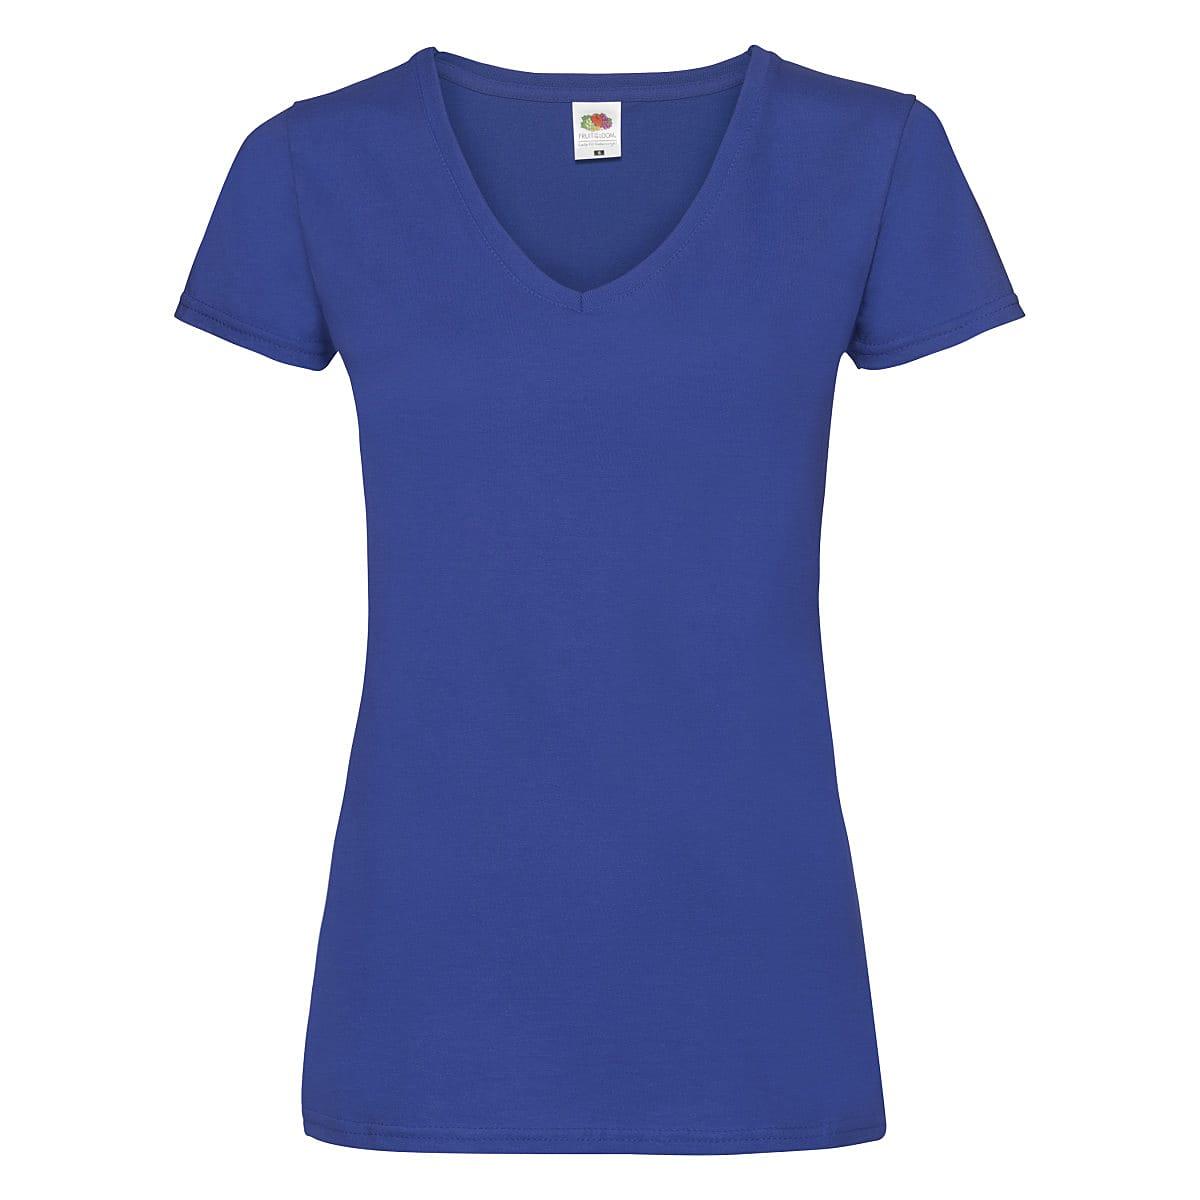 Fruit Of The Loom Lady-Fit Valueweight V-Neck T-Shirt in Royal Blue (Product Code: 61398)